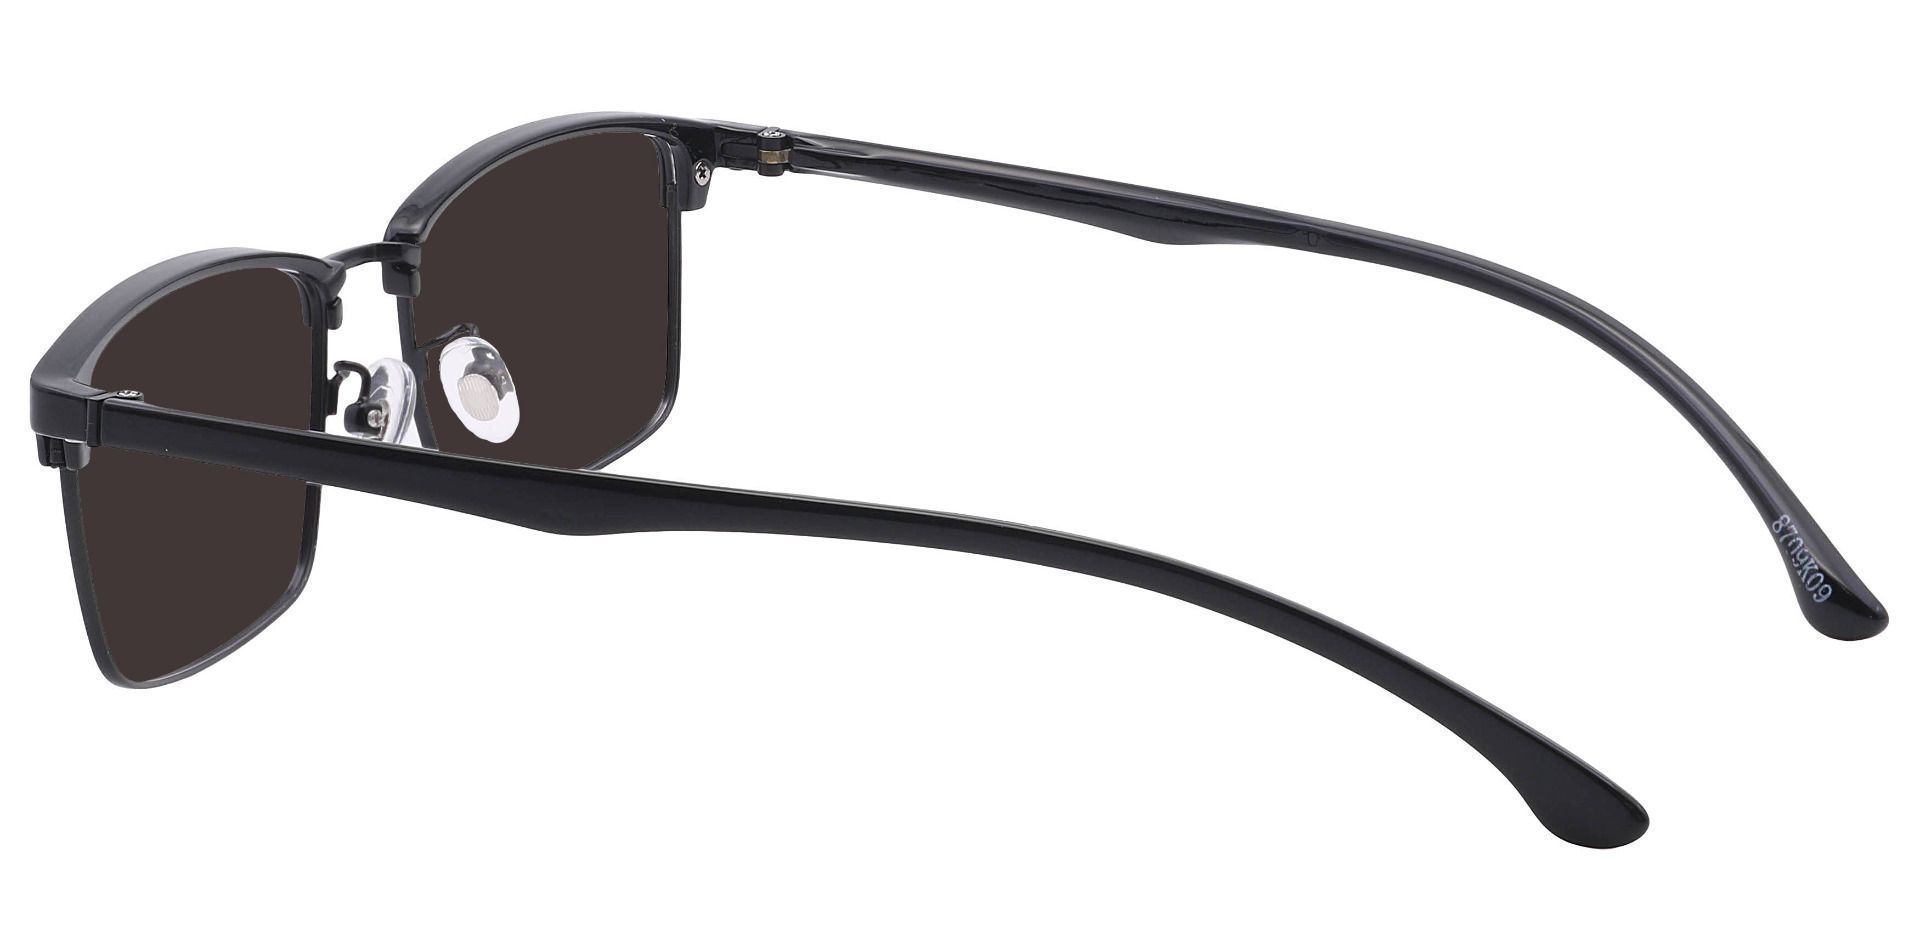 Young Browline Lined Bifocal Sunglasses - Black Frame With Gray Lenses